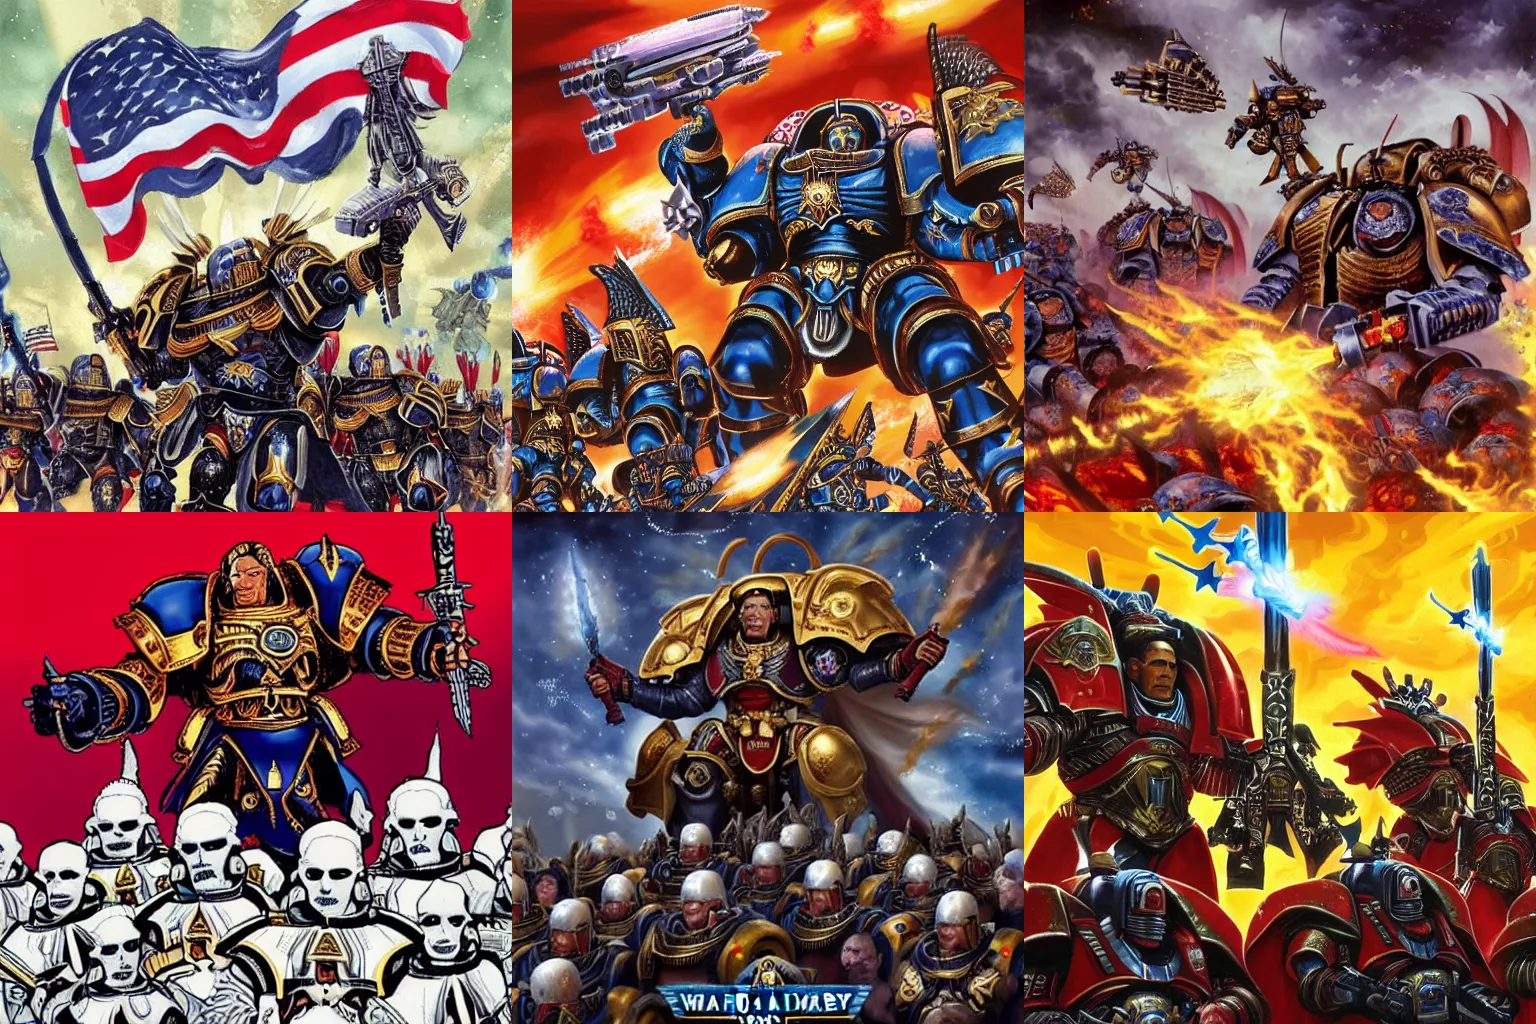 Prompt: Illustration of Obama as the God-Emperor of Mankind, leading his army of Astartes Space Marines into glorious battle. Warhammer 40k.